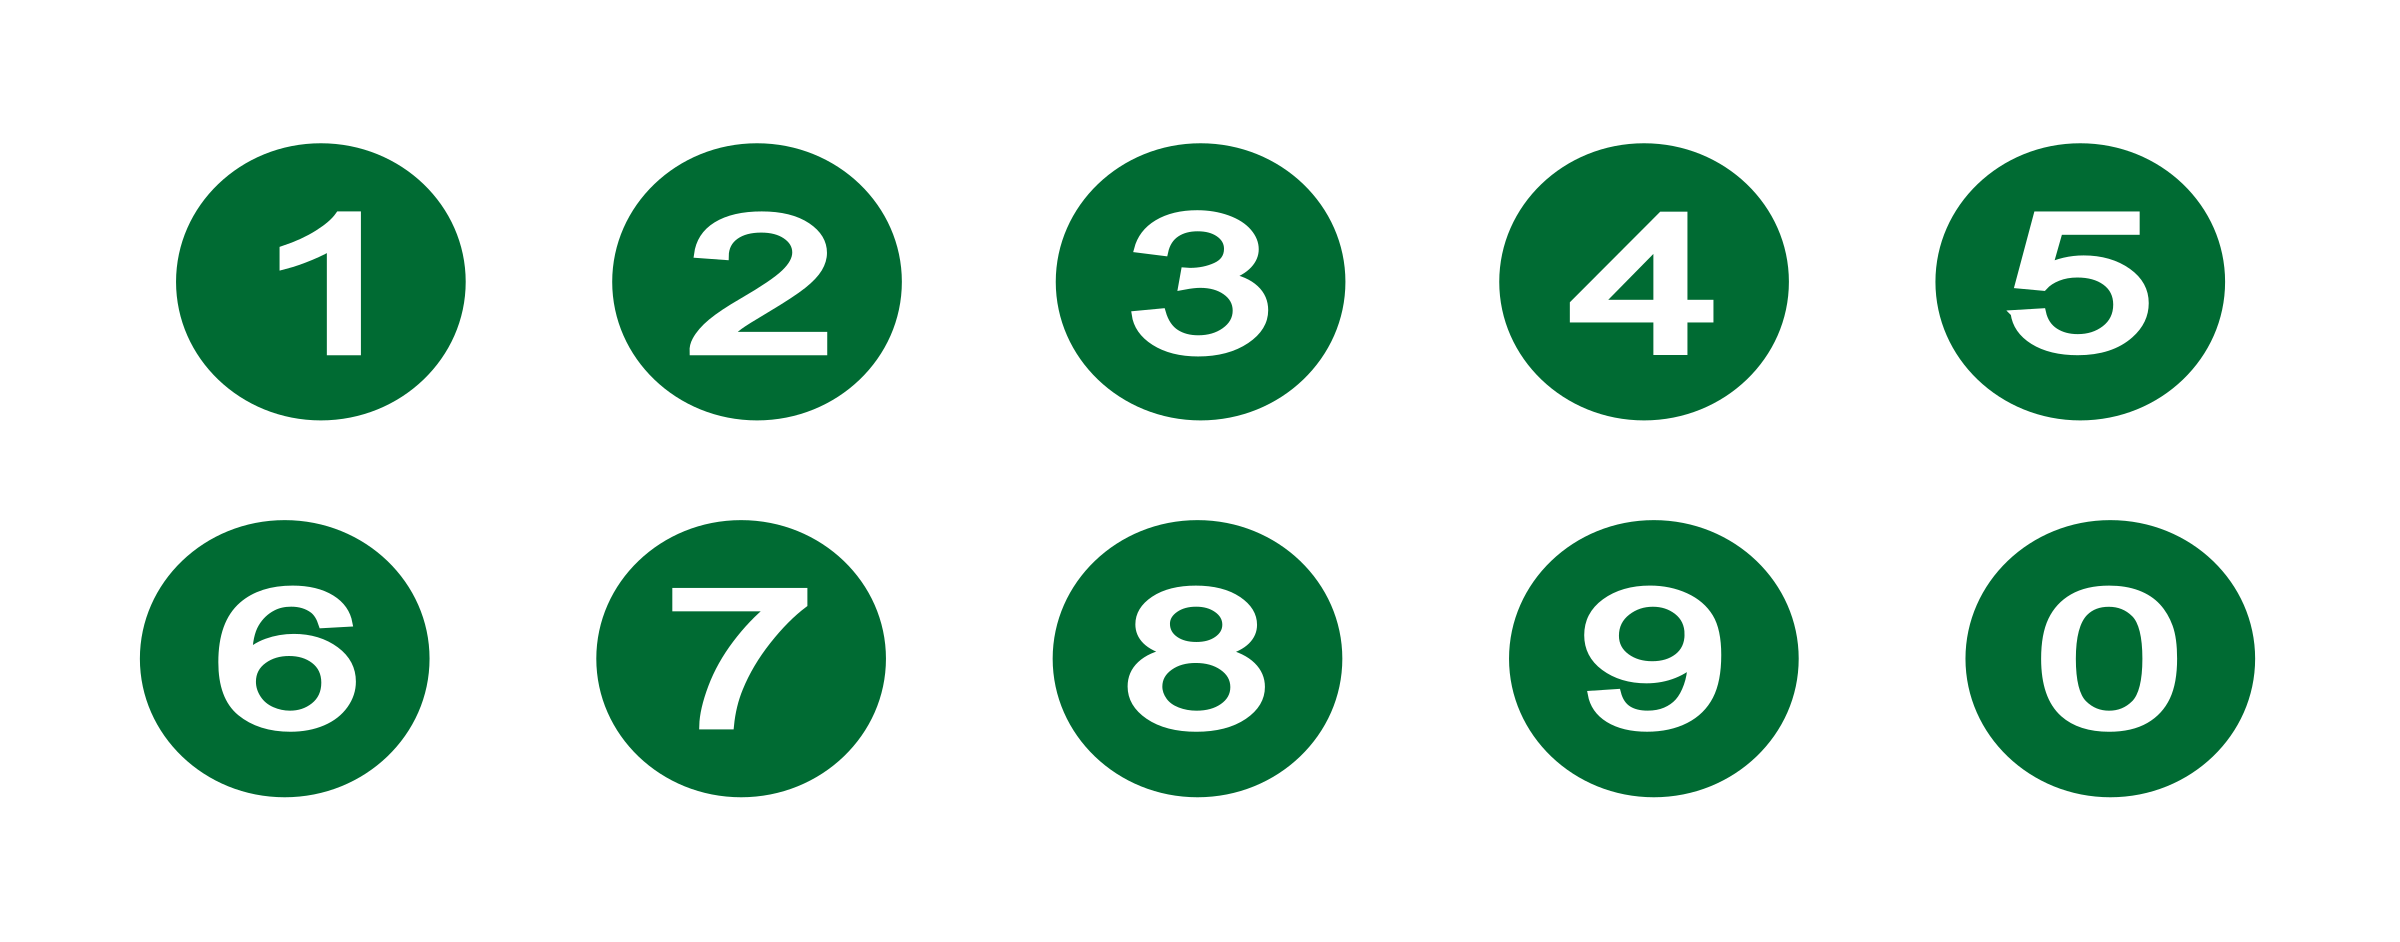 clipart numbers in circles - photo #1